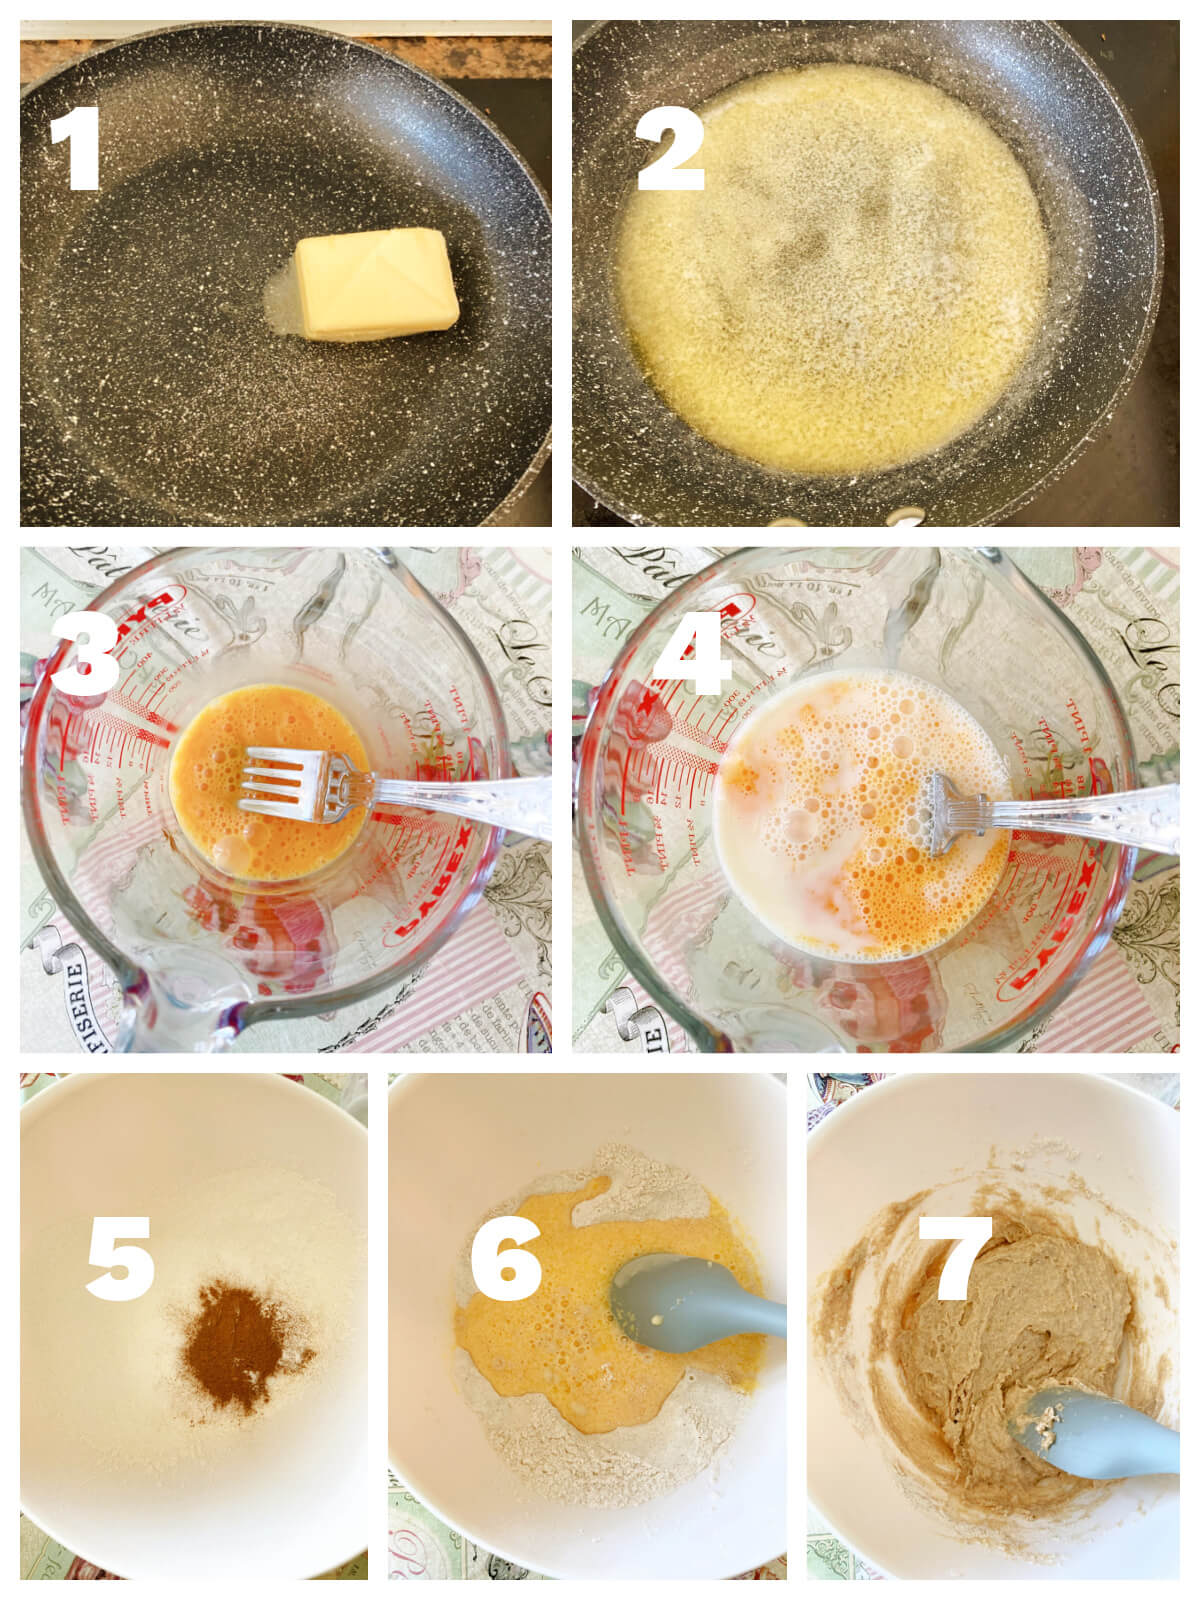 Collage of 7 photos to show how to make the batter for waffles.